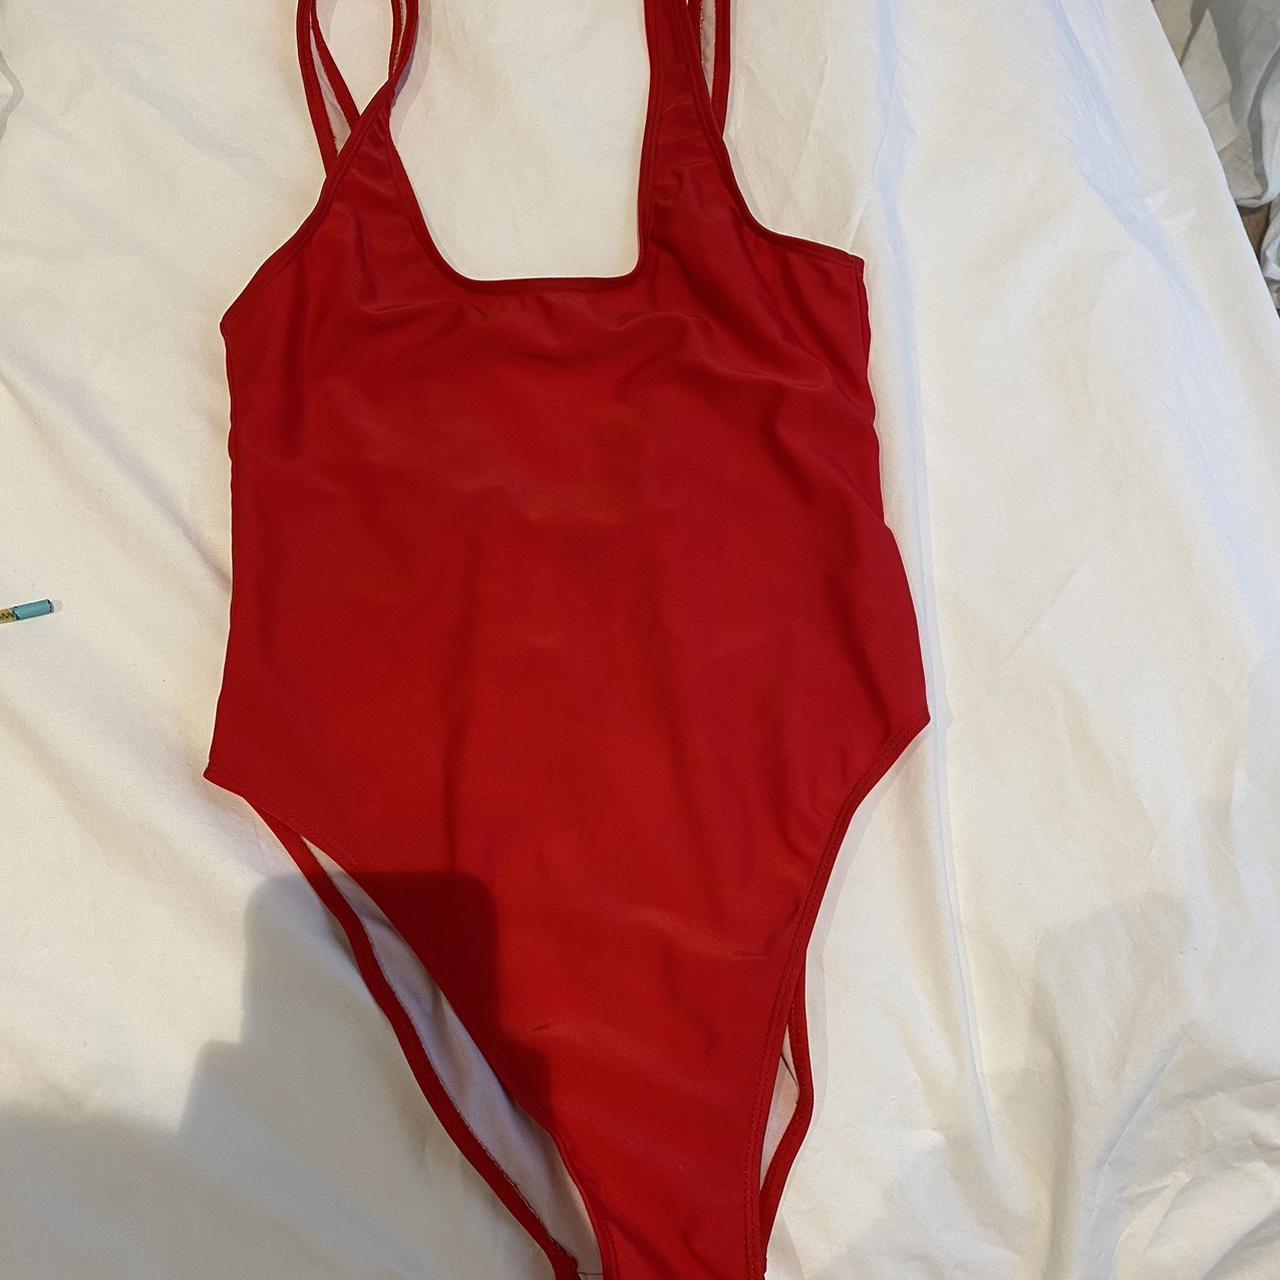 Baywatch red one peice - worn once ️ size S -... - Depop